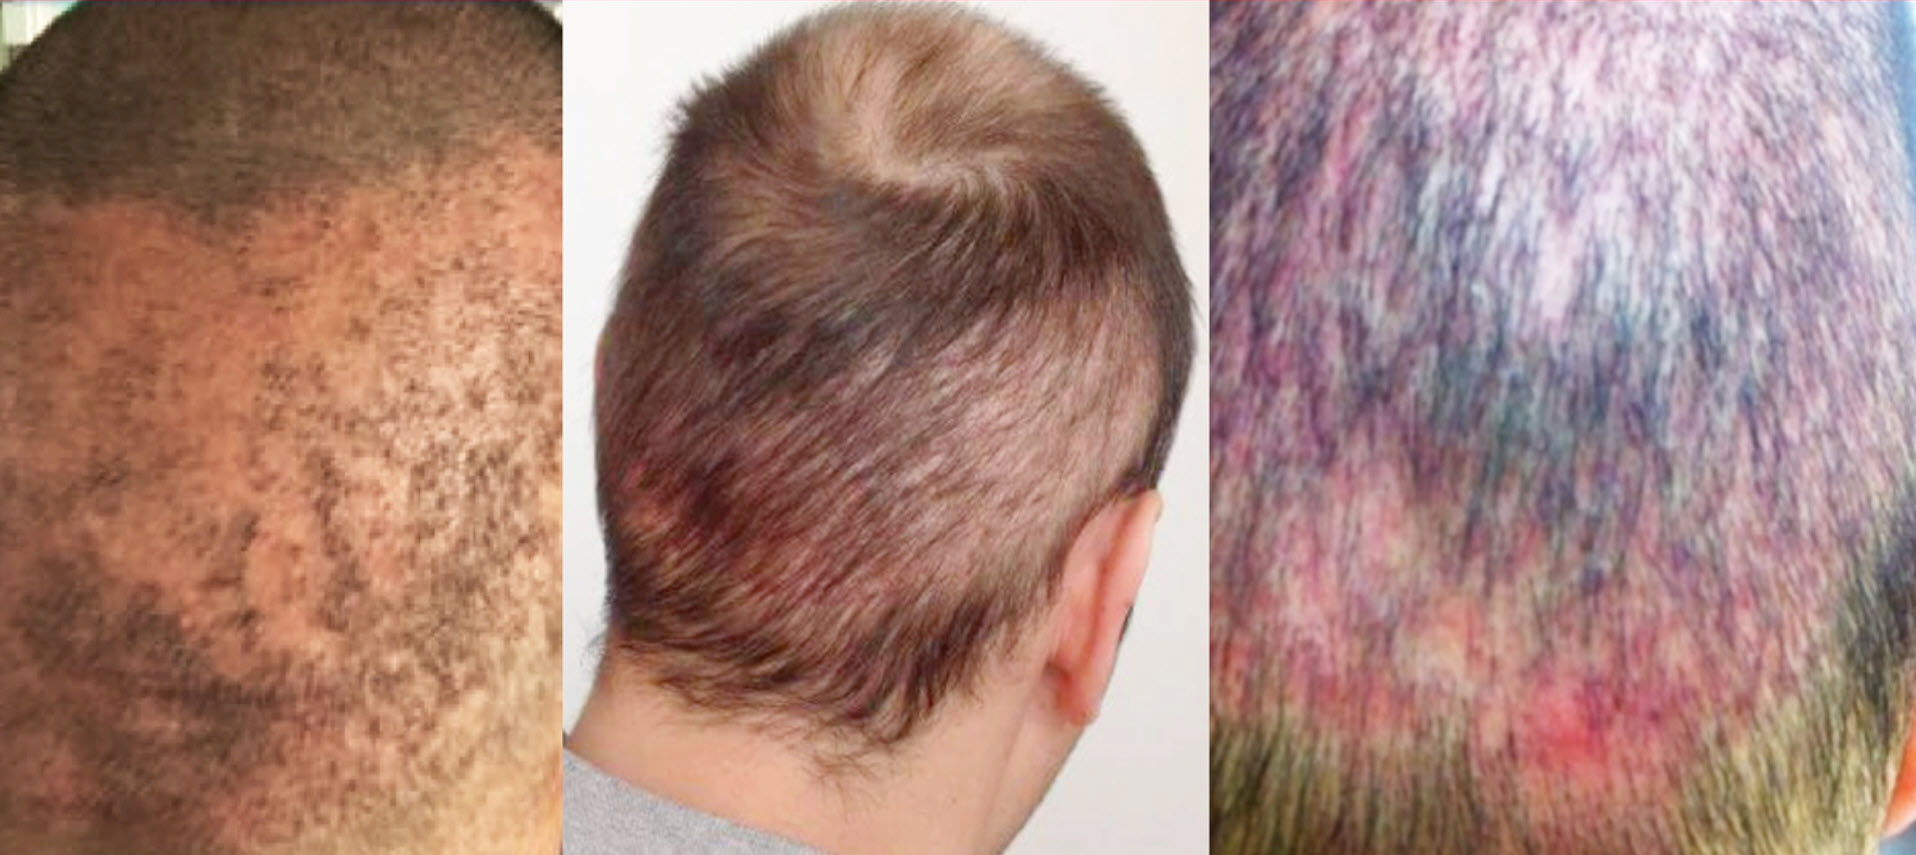 Beware Illegal Hair Transplant - Fight the Fight